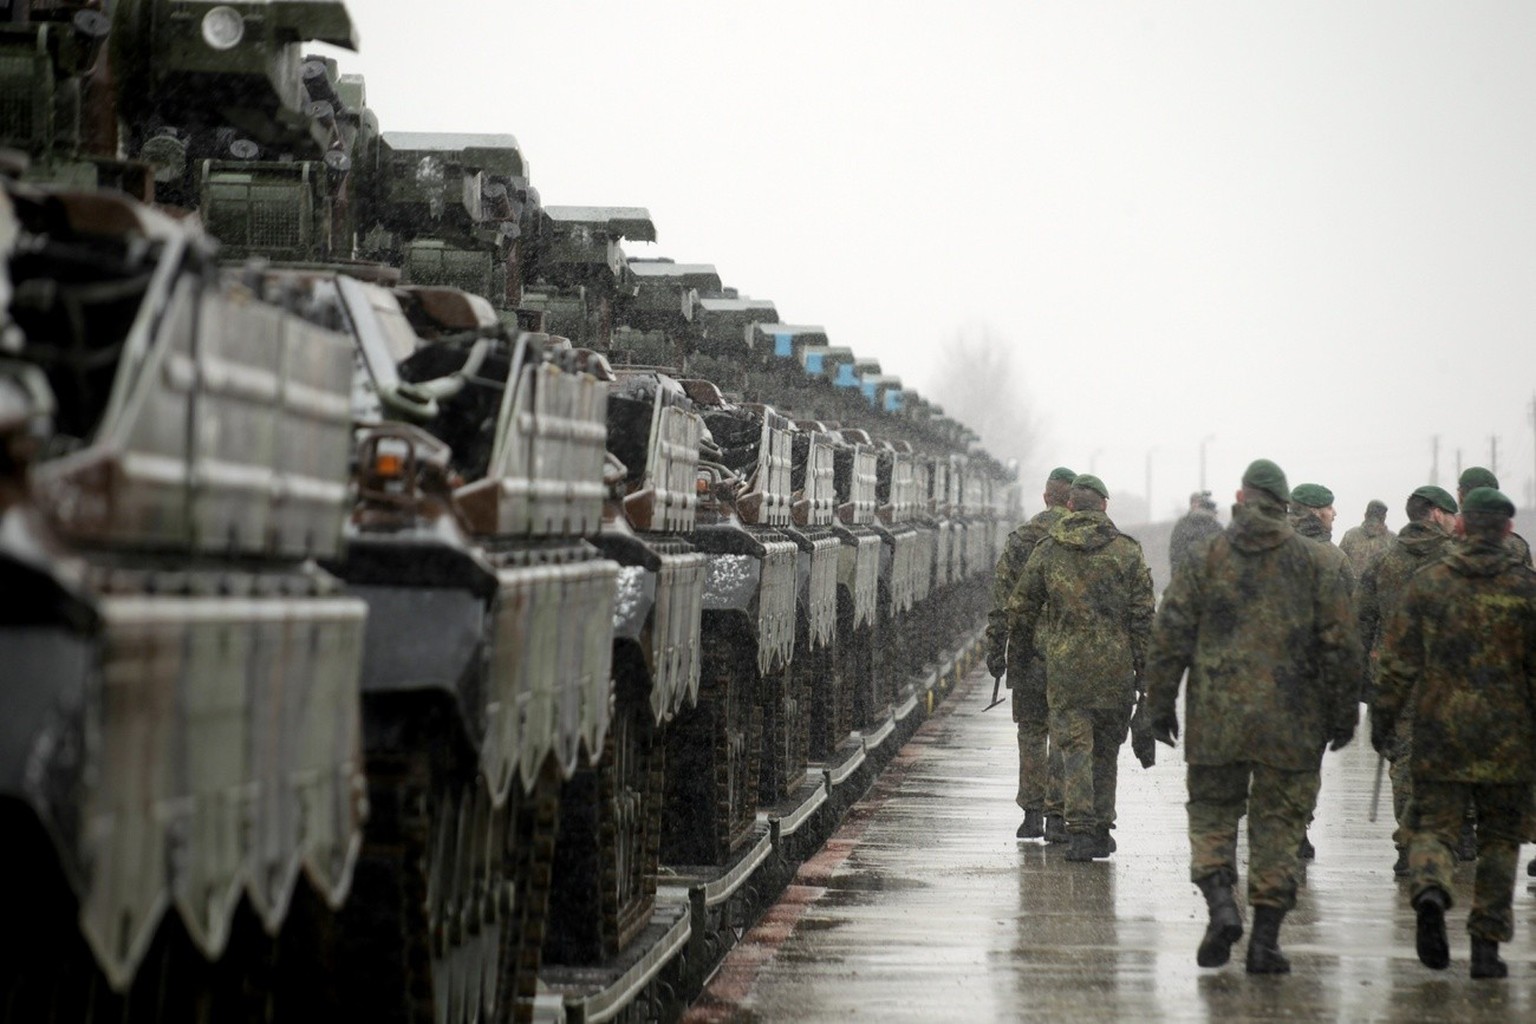 epa05812409 German infantry fighting vehicles Marder and other military equipment arrives in Sestokai, Lithuania, 24 February 2017. Around 60 vehicles, including Leopard tanks, Marder IFVs, Dachs engi ...